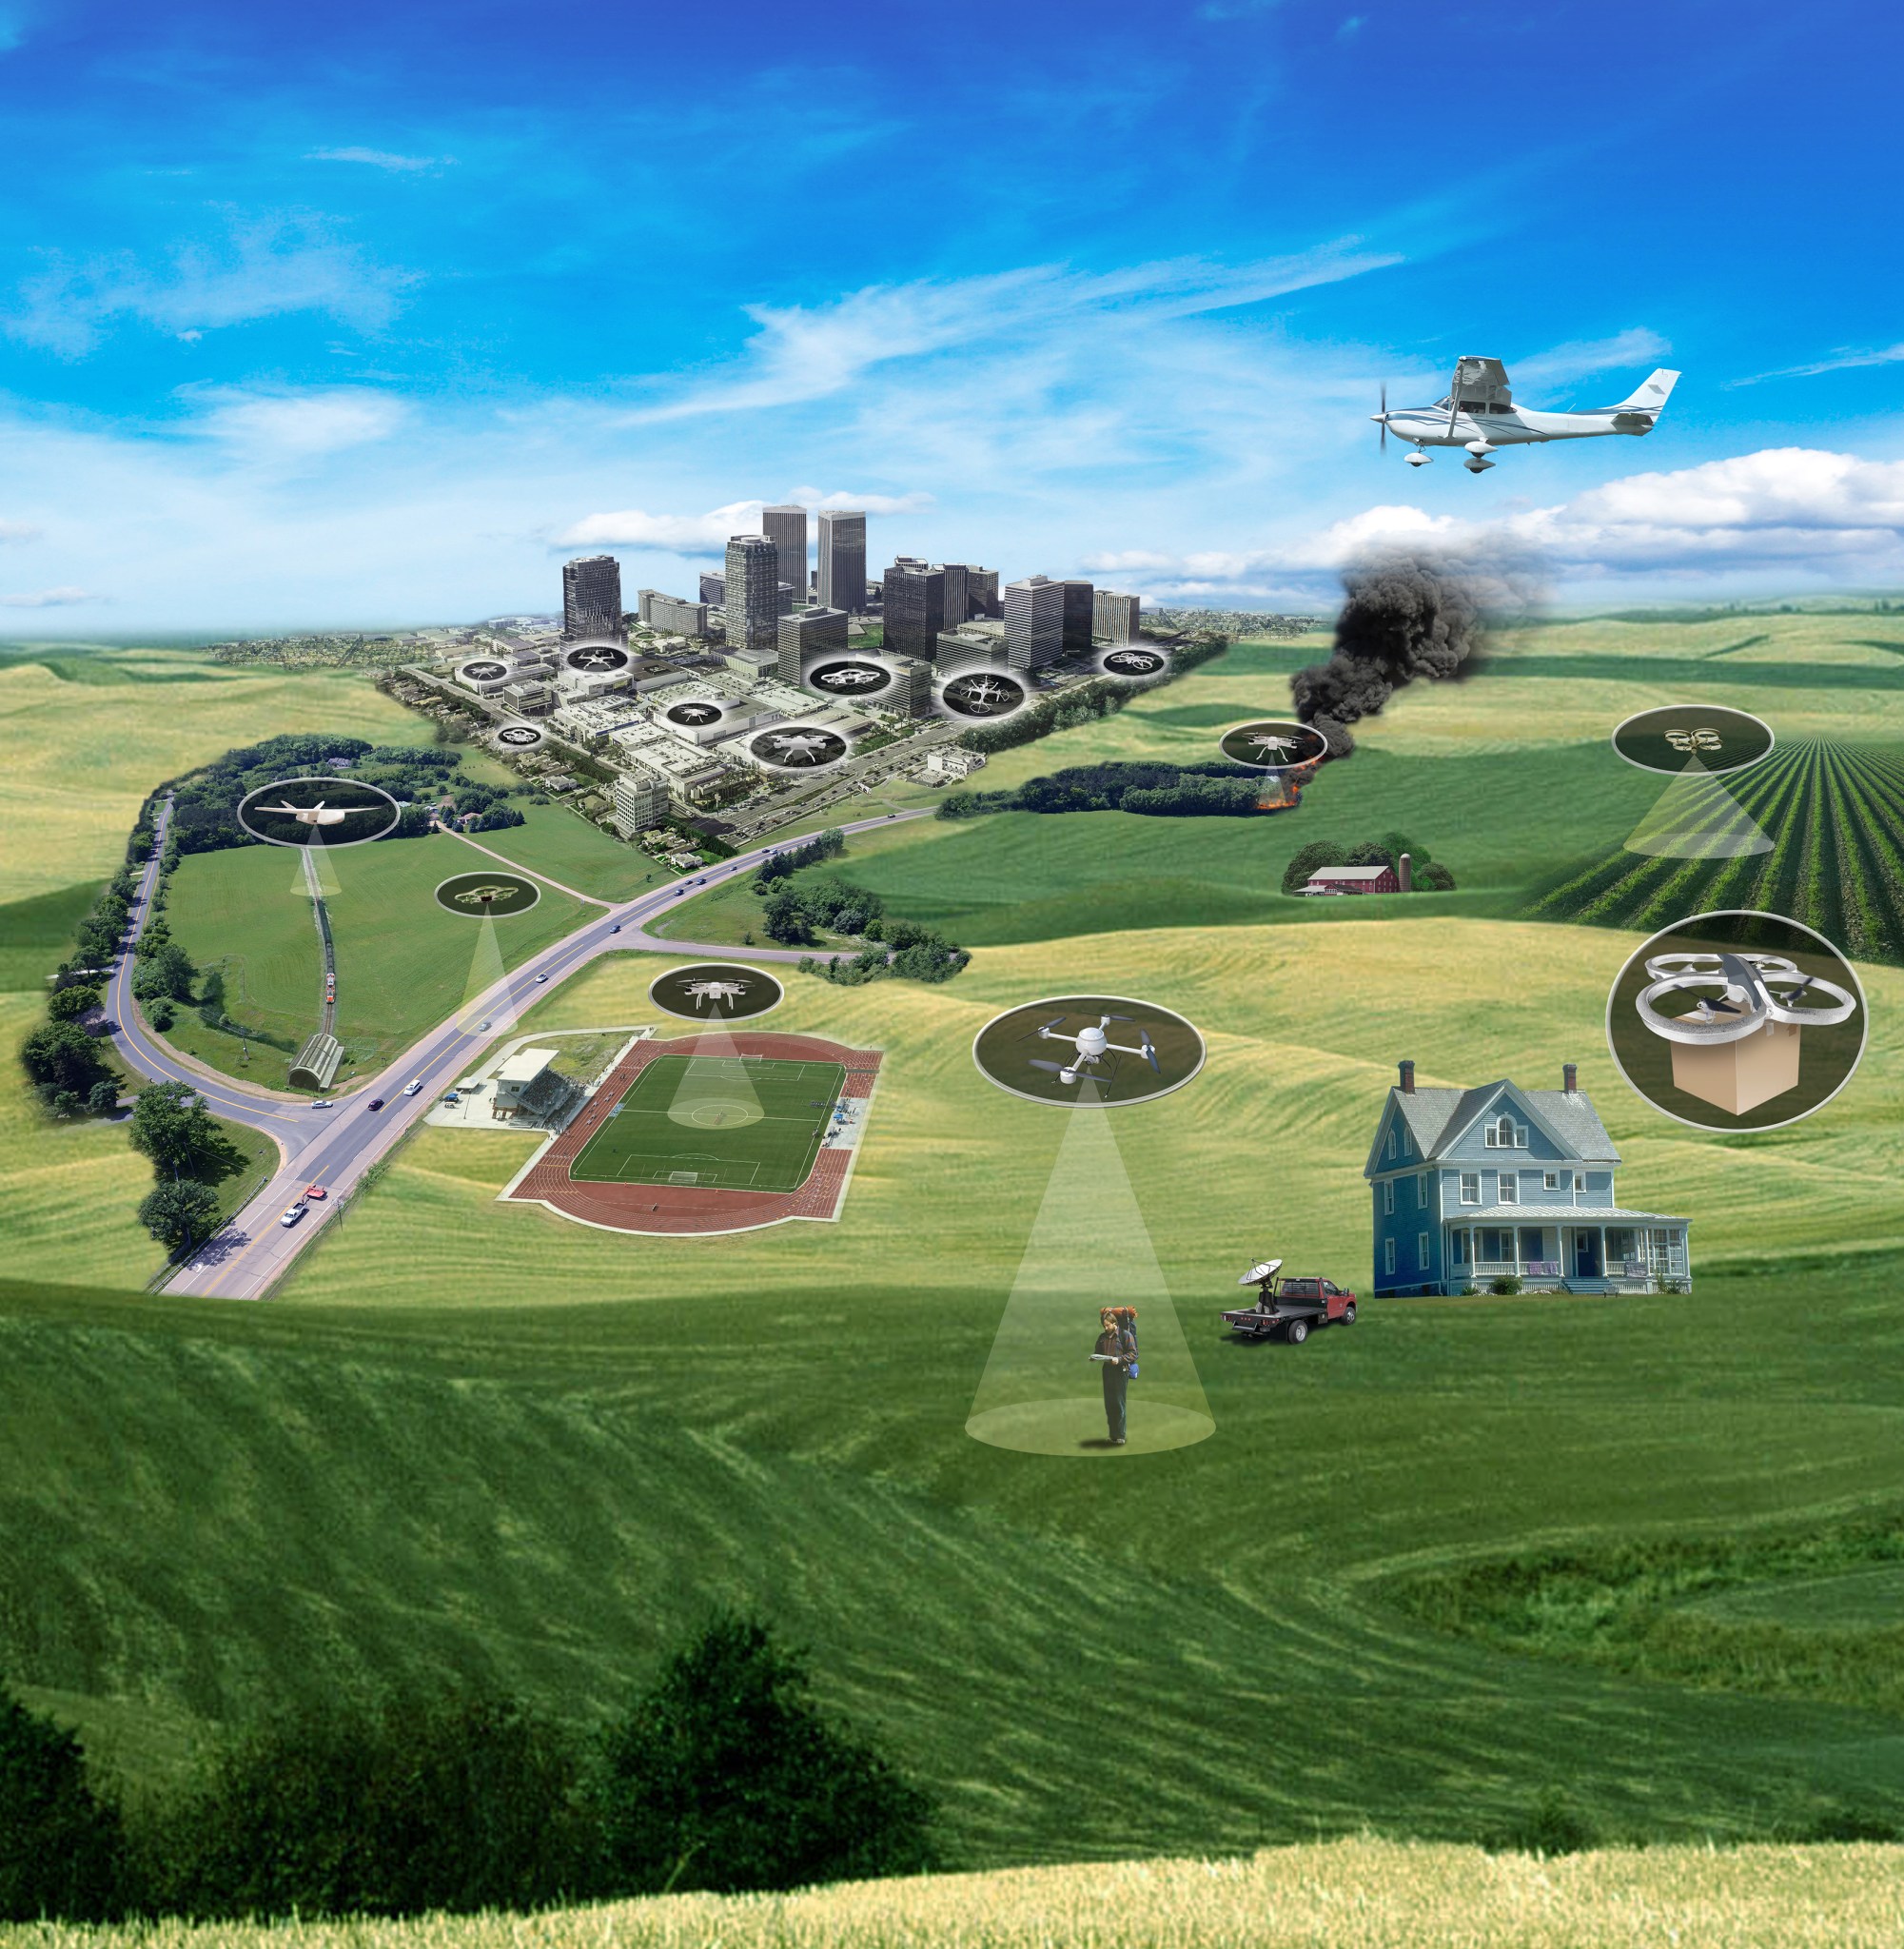 An illustration of the many potential uses for drones, from rural settings to big cities.